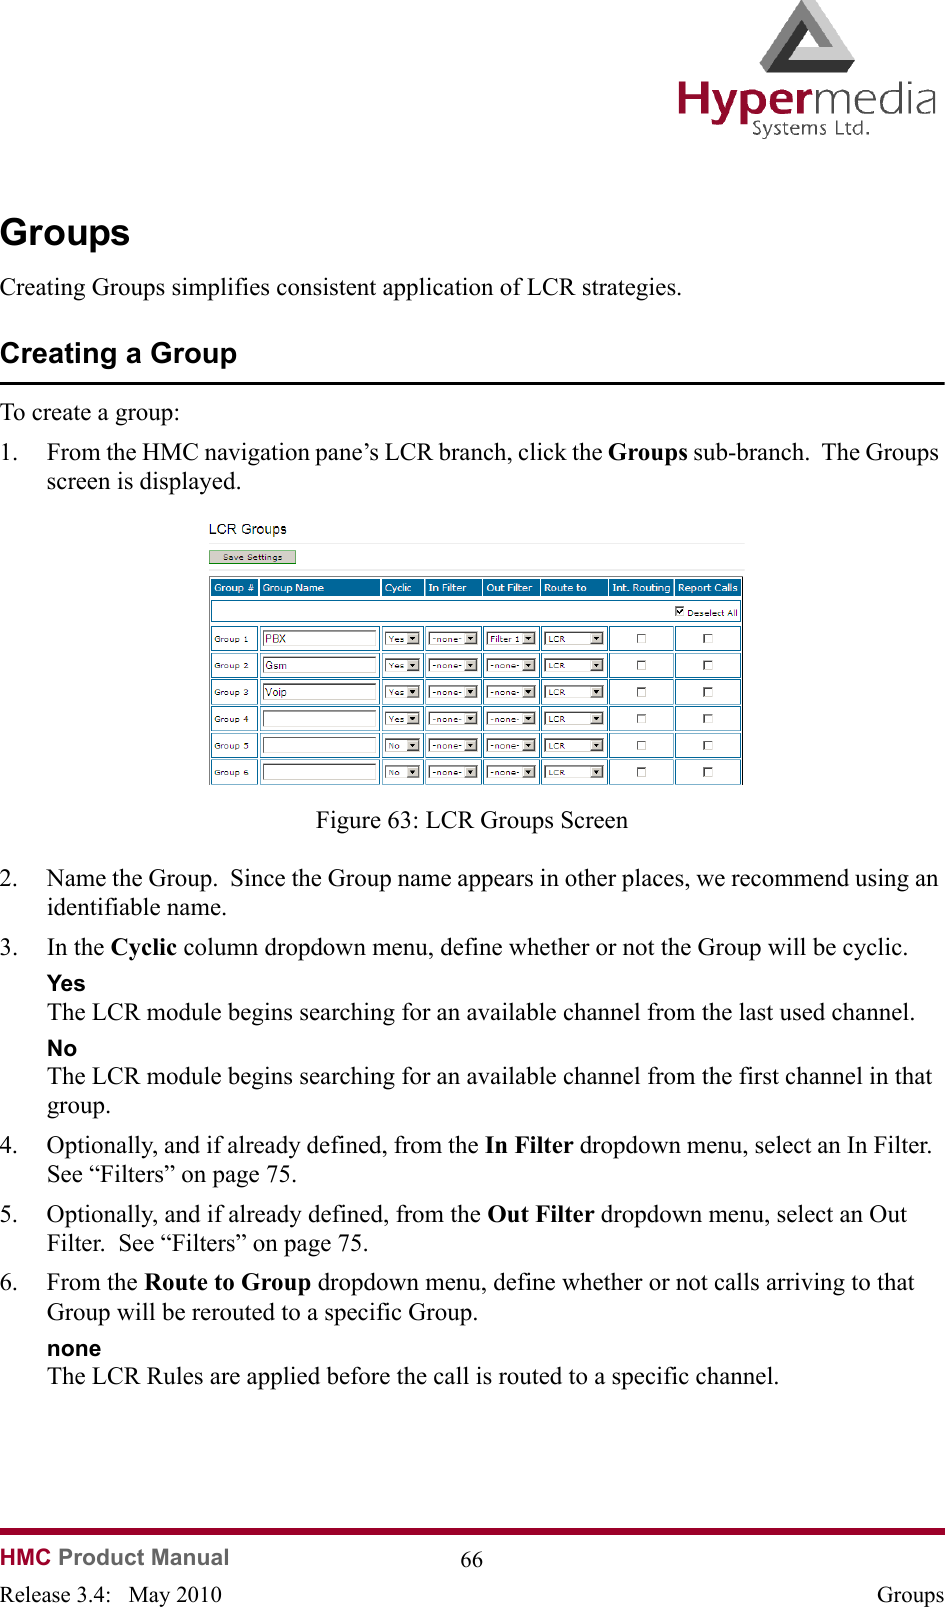   HMC Product Manual  66Release 3.4:   May 2010 GroupsGroupsCreating Groups simplifies consistent application of LCR strategies.  Creating a GroupTo create a group:1. From the HMC navigation pane’s LCR branch, click the Groups sub-branch.  The Groups screen is displayed.              Figure 63: LCR Groups Screen2. Name the Group.  Since the Group name appears in other places, we recommend using an identifiable name.3. In the Cyclic column dropdown menu, define whether or not the Group will be cyclic.  YesThe LCR module begins searching for an available channel from the last used channel.  No The LCR module begins searching for an available channel from the first channel in that group.4. Optionally, and if already defined, from the In Filter dropdown menu, select an In Filter.  See “Filters” on page 75.5. Optionally, and if already defined, from the Out Filter dropdown menu, select an Out Filter.  See “Filters” on page 75.6. From the Route to Group dropdown menu, define whether or not calls arriving to that Group will be rerouted to a specific Group.noneThe LCR Rules are applied before the call is routed to a specific channel.